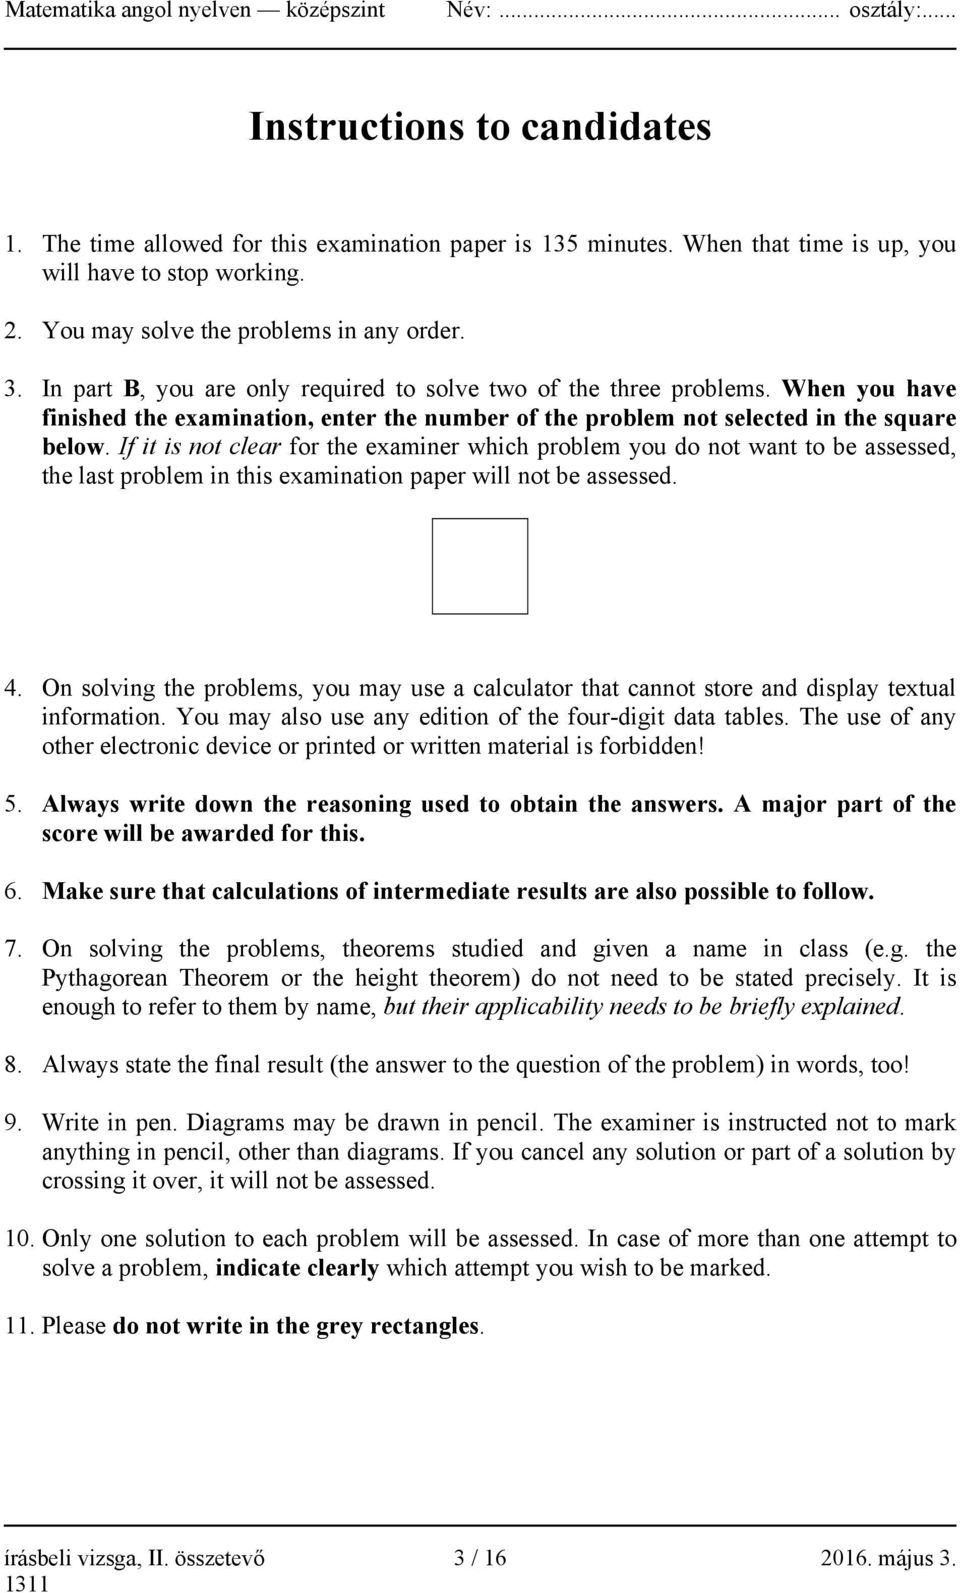 If it is not clear for the examiner which problem you do not want to be assessed, the last problem in this examination paper will not be assessed. 4.